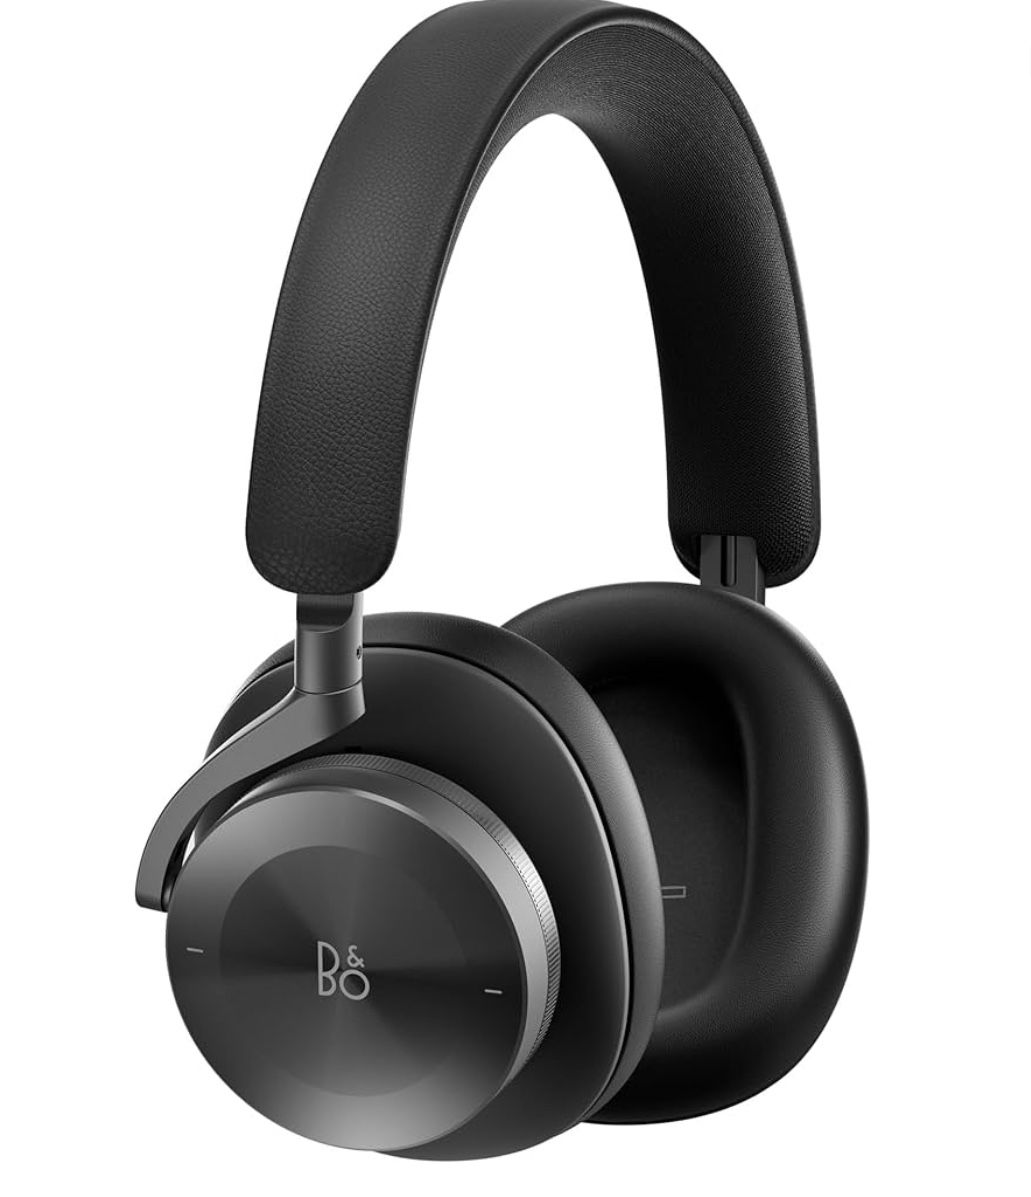 Bang & Olufsen Beoplay H95 Premium Comfortable Wireless Active Noise Cancelling (ANC) Over-Ear Headphones with Protective Carrying Case, RF, Bluetooth